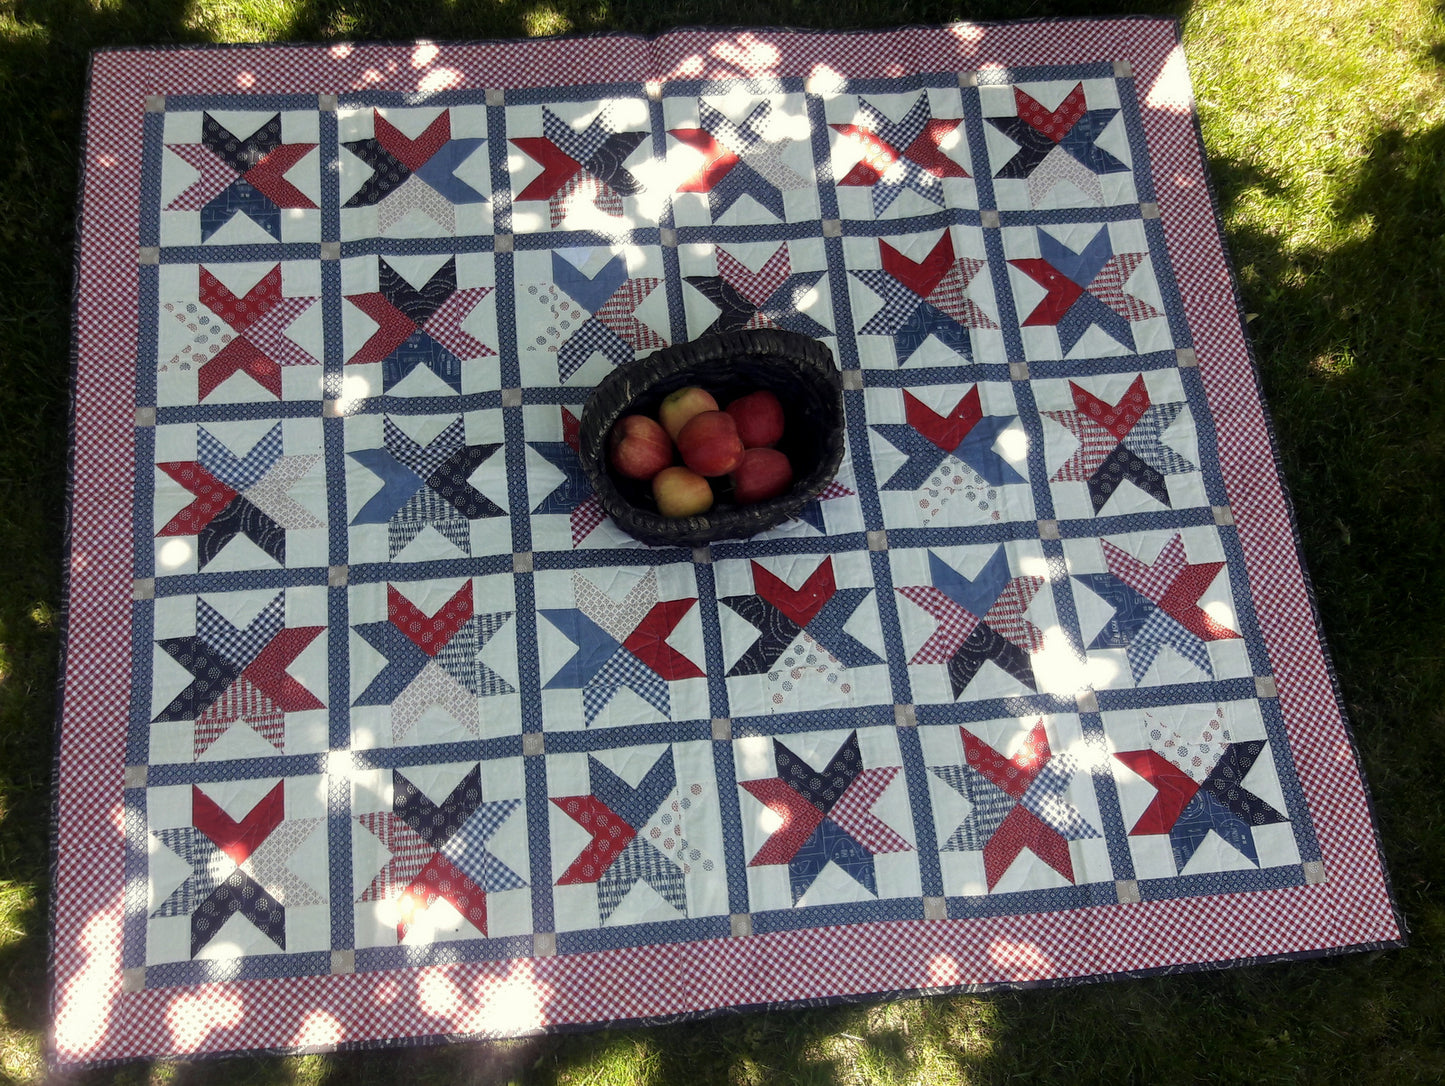 Braveheart Picnic Quilt & Matching Table Runner - Quilt Pattern PDF